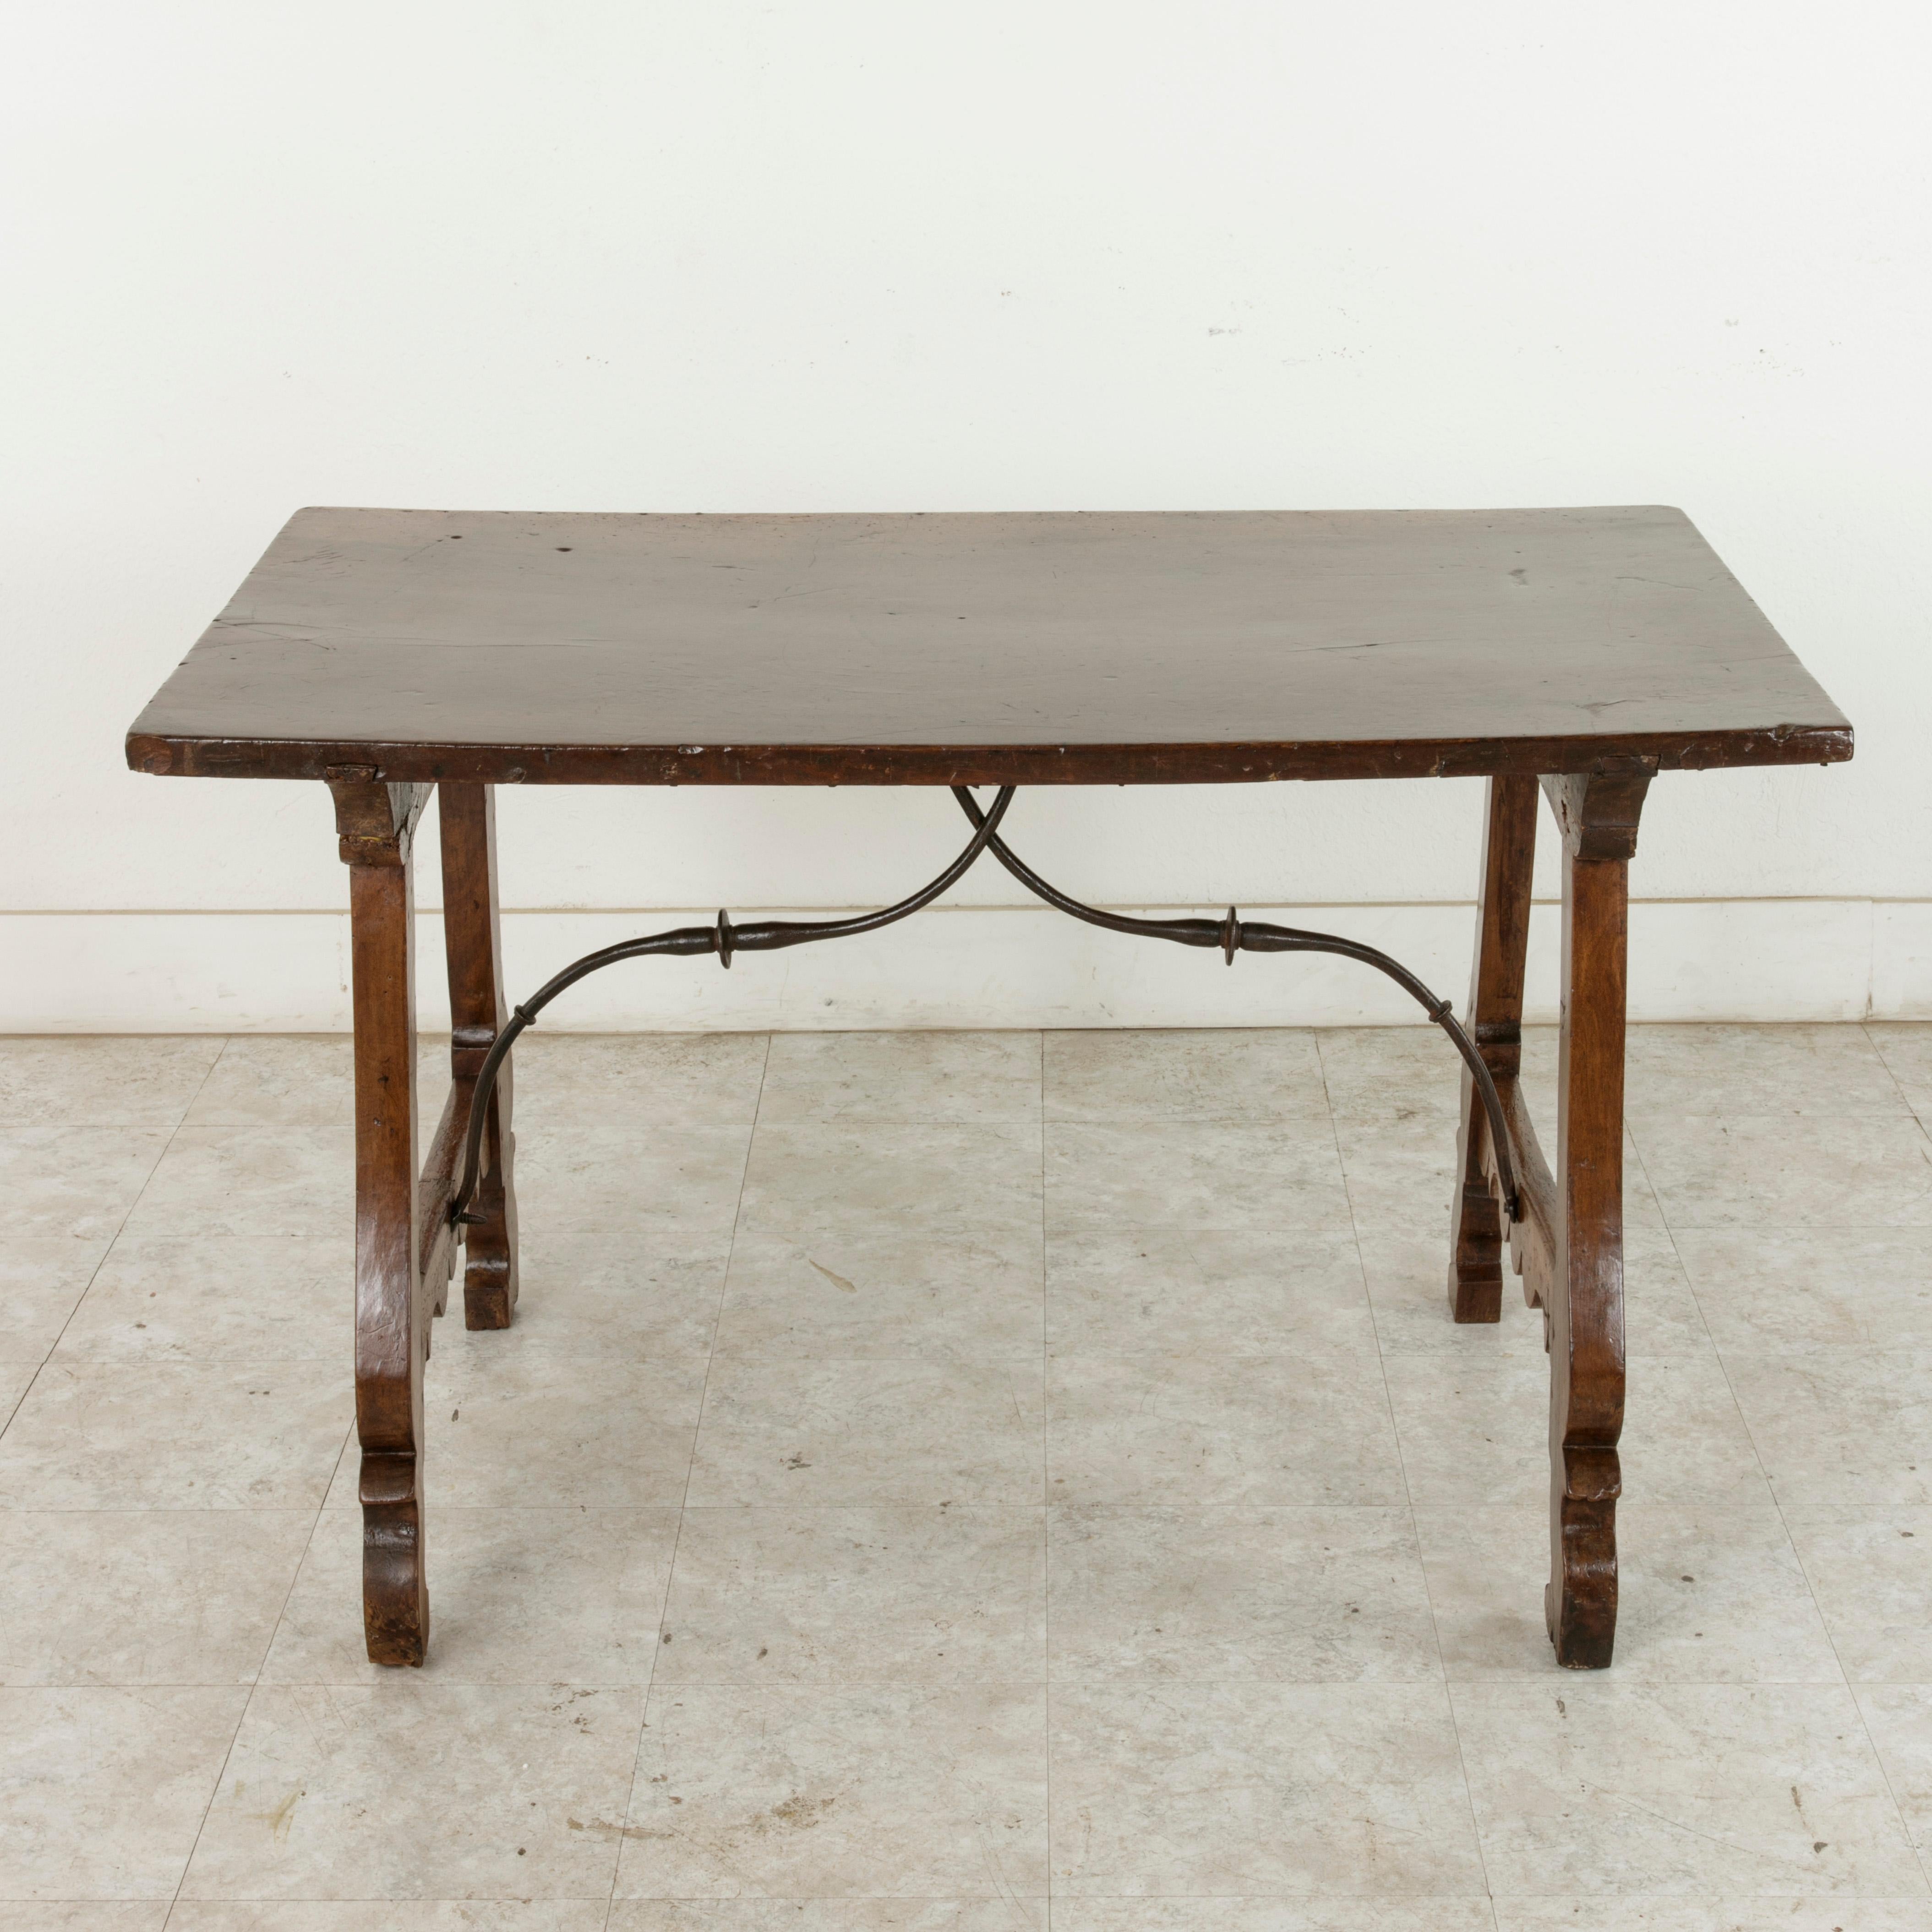 This late 17th century Spanish Renaissance writing table is constructed of solid walnut and features an impressive 30-inch wide top made from a single plank of walnut. The top joins the hand pegged base by means of a notched spline that run the